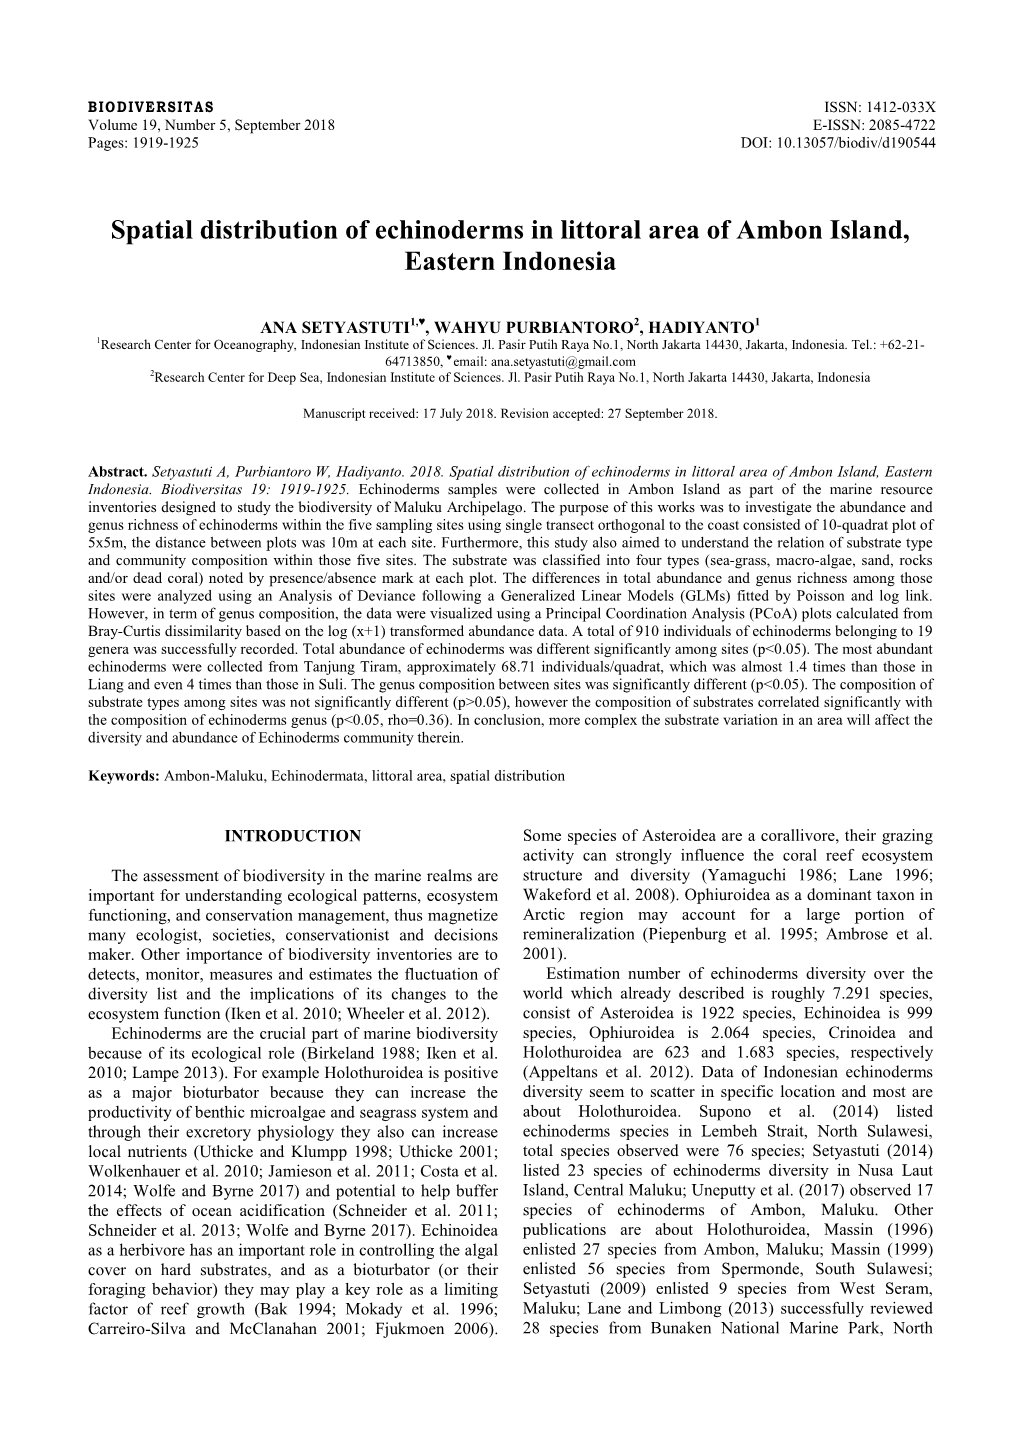 Spatial Distribution of Echinoderms in Littoral Area of Ambon Island, Eastern Indonesia